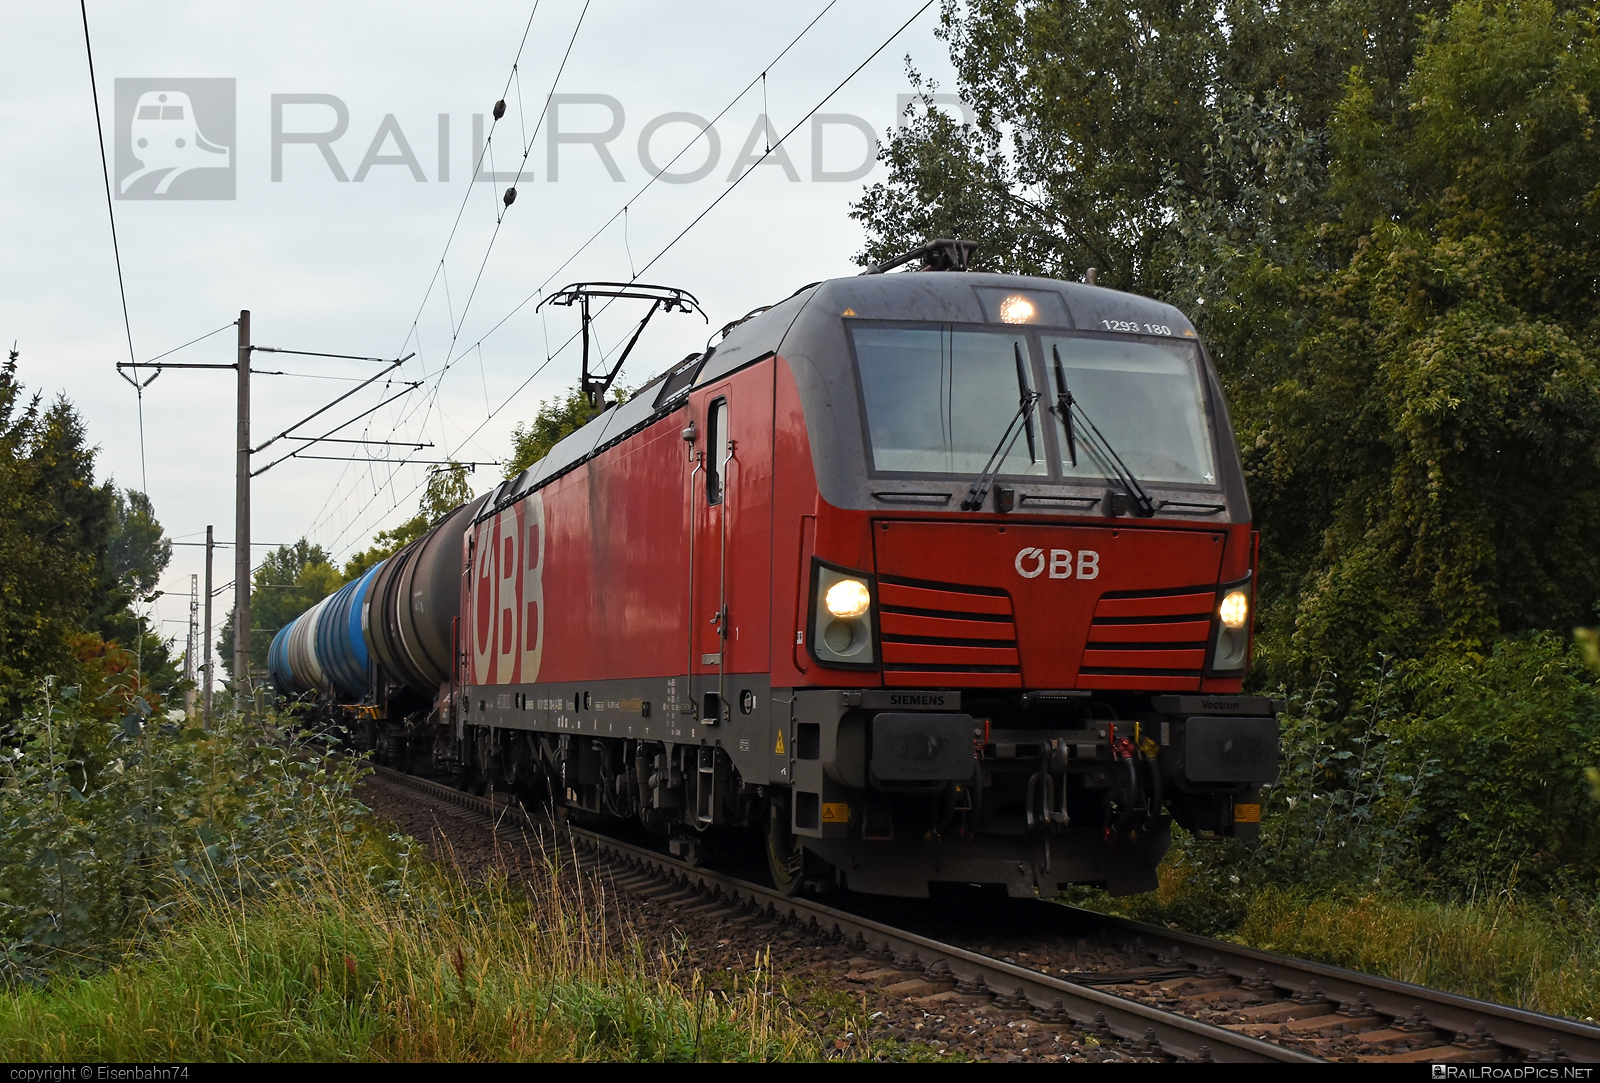 Siemens Vectron MS - 1293 180 operated by Rail Cargo Austria AG #kesselwagen #obb #osterreichischebundesbahnen #rcw #siemens #siemensvectron #siemensvectronms #tankwagon #vectron #vectronms